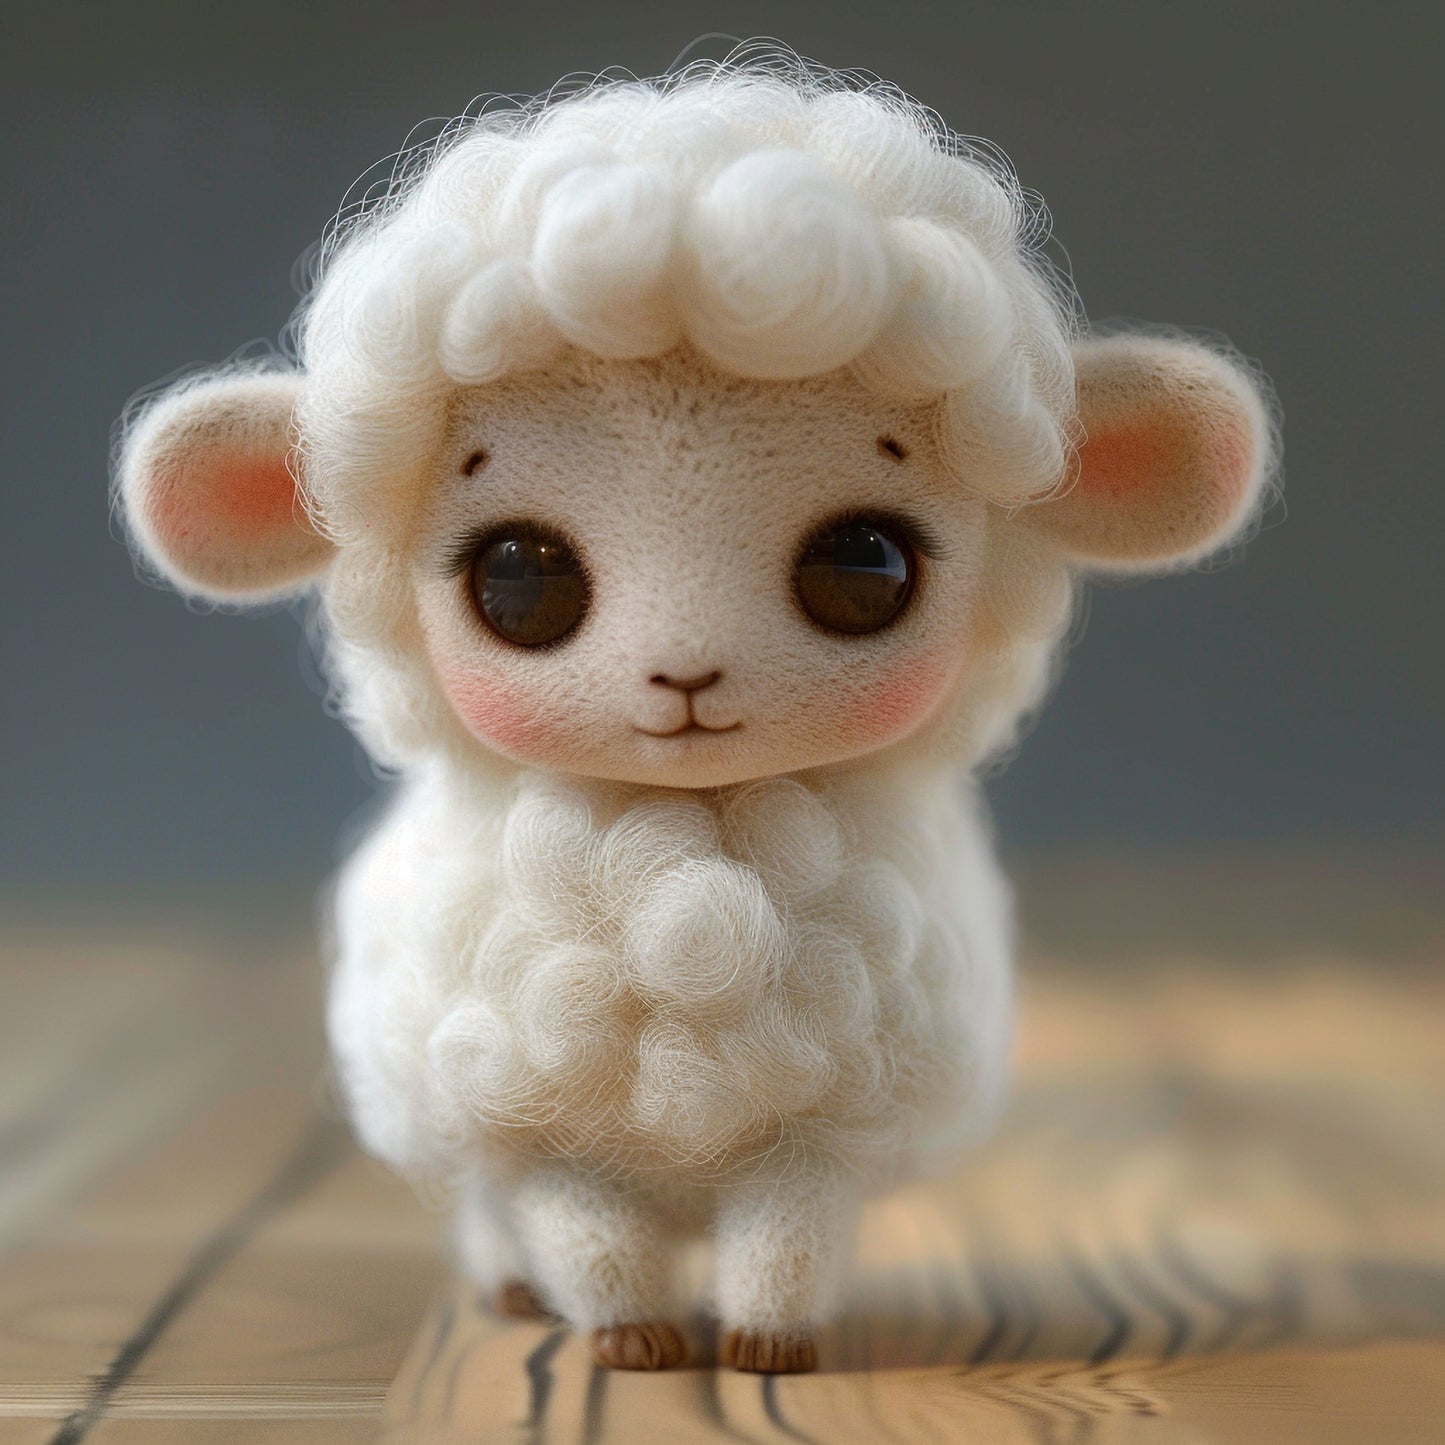 Handmade Needle Felted Baby Sheep on Wooden Surface